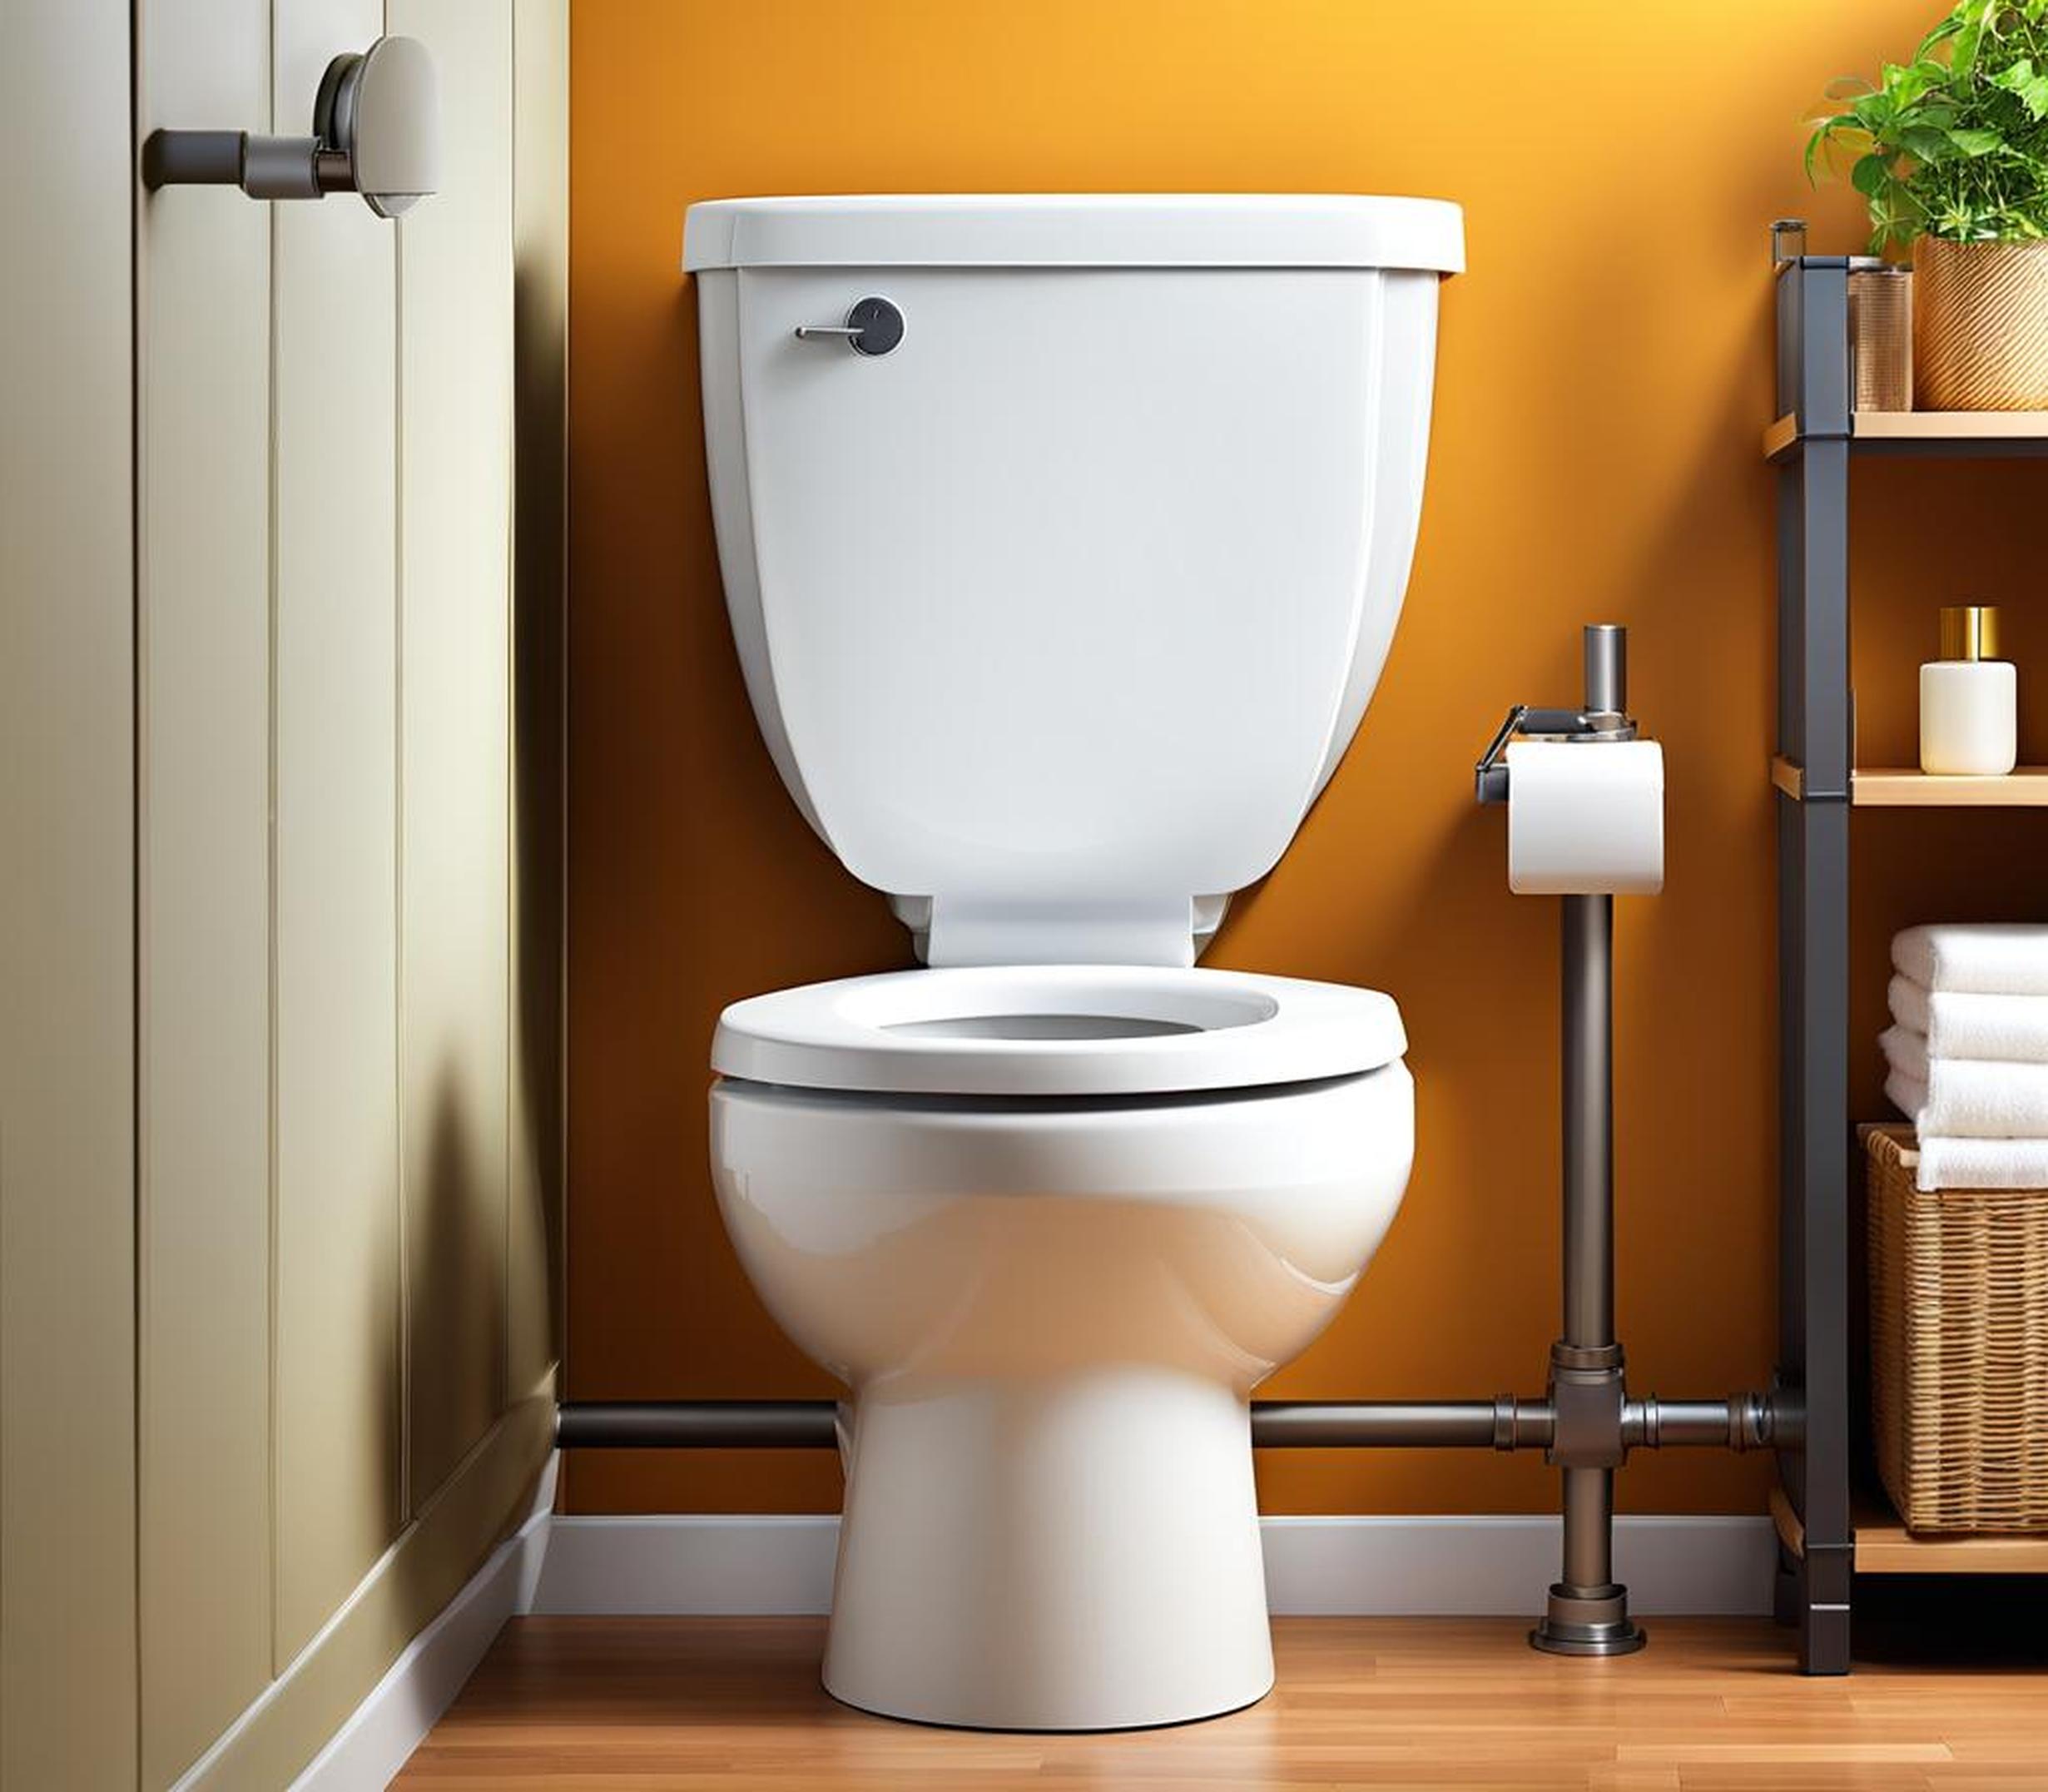 how to stop noisy pipes when flushing toilet